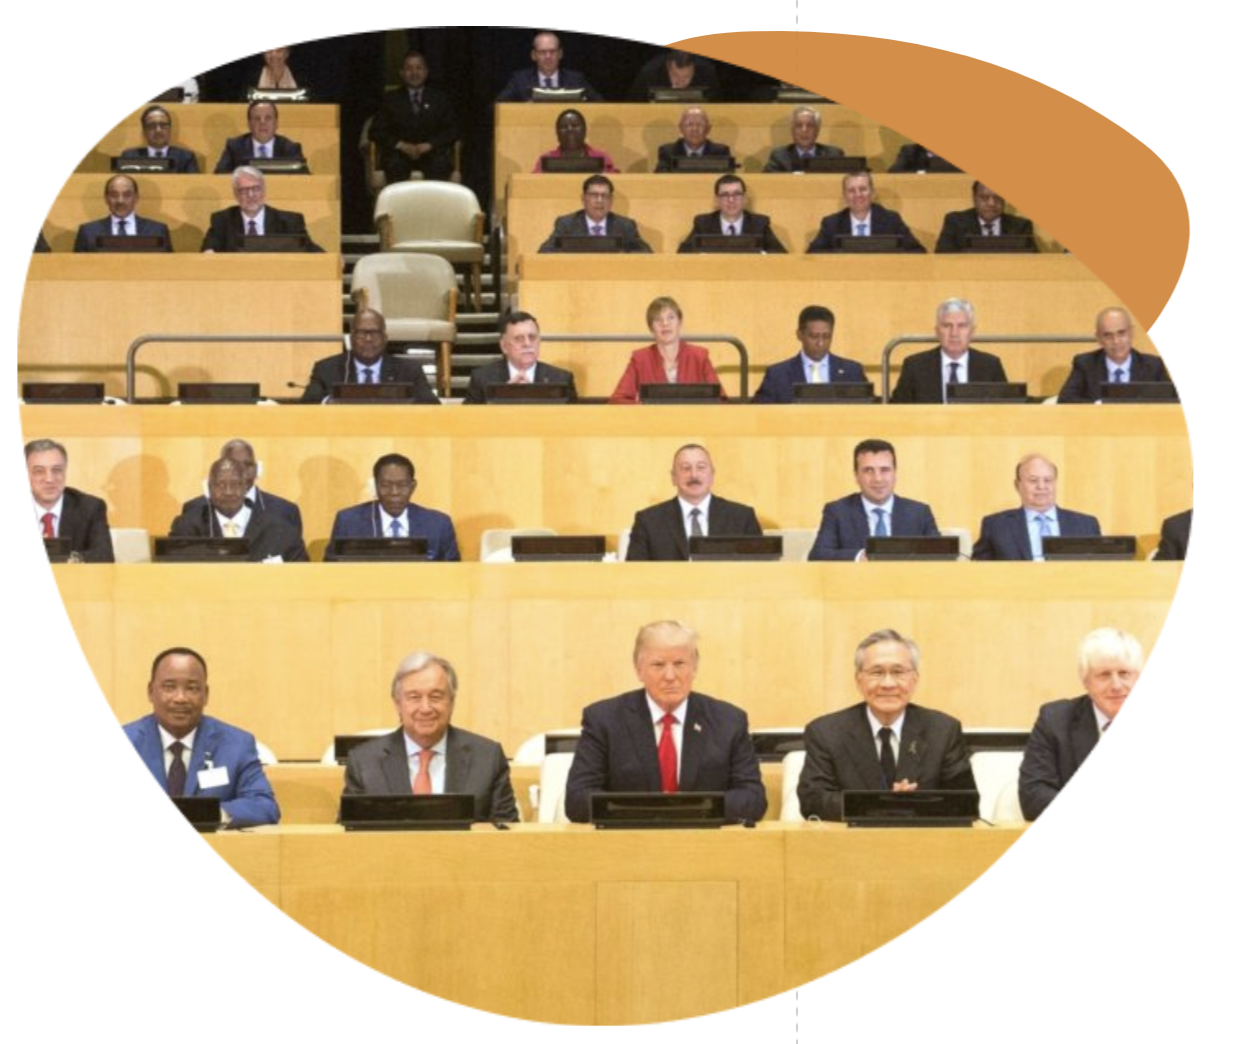 World leaders sit in rows of seats